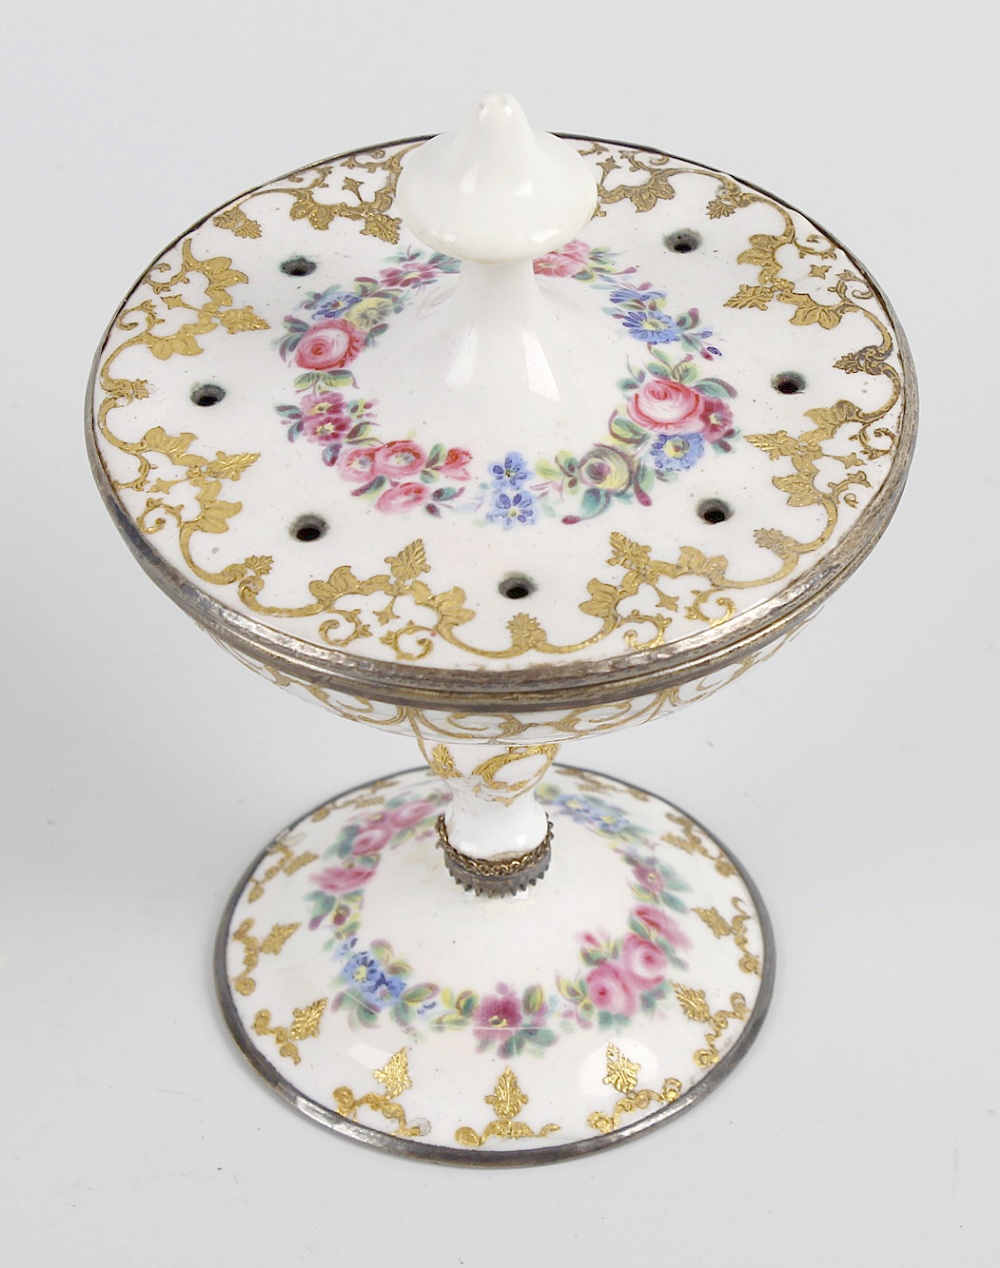 A 19th century French enamel pomander, having a pierced circular cover over a shallow dish raised